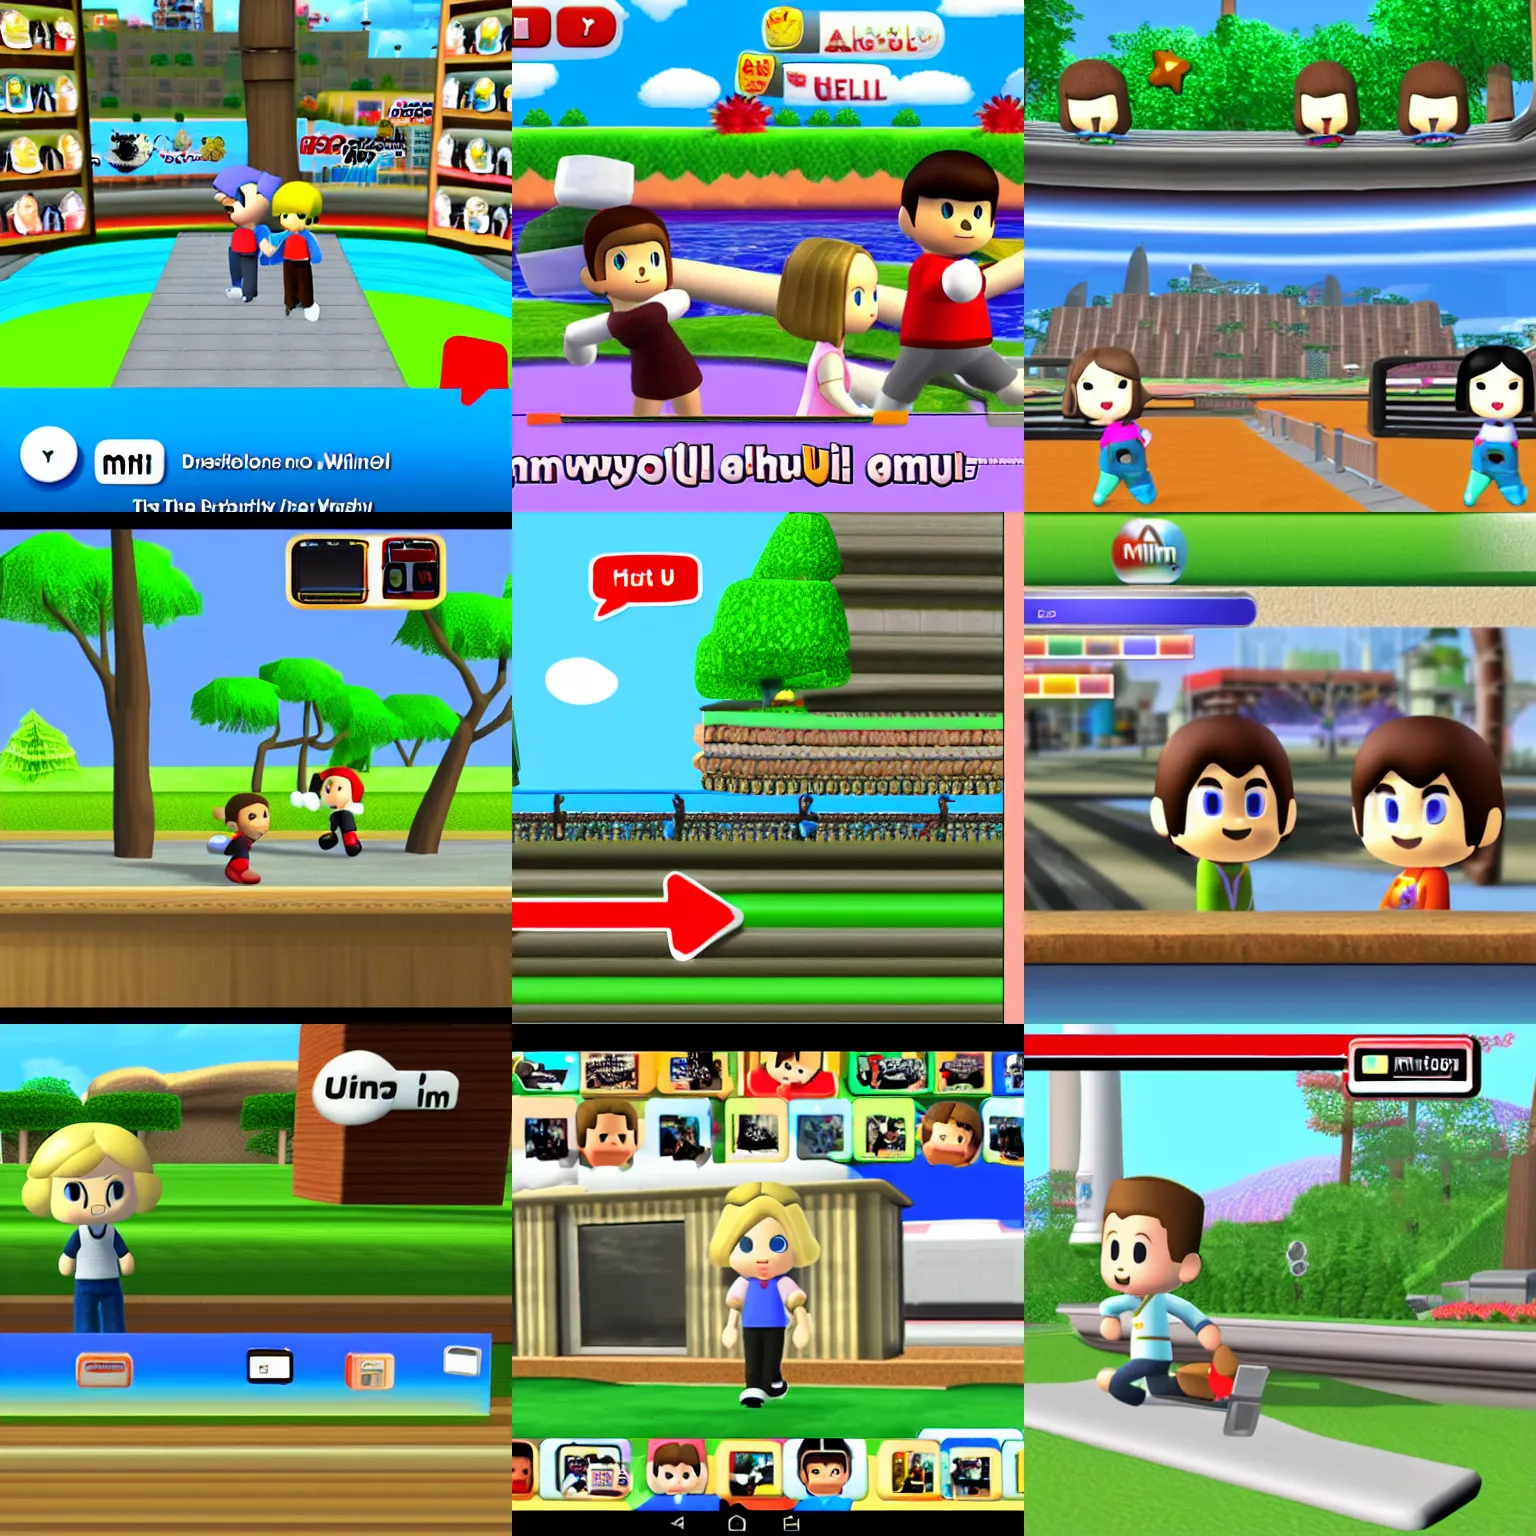 Prompt: A screenshot of the Mii Channel on the Nintendo Wii